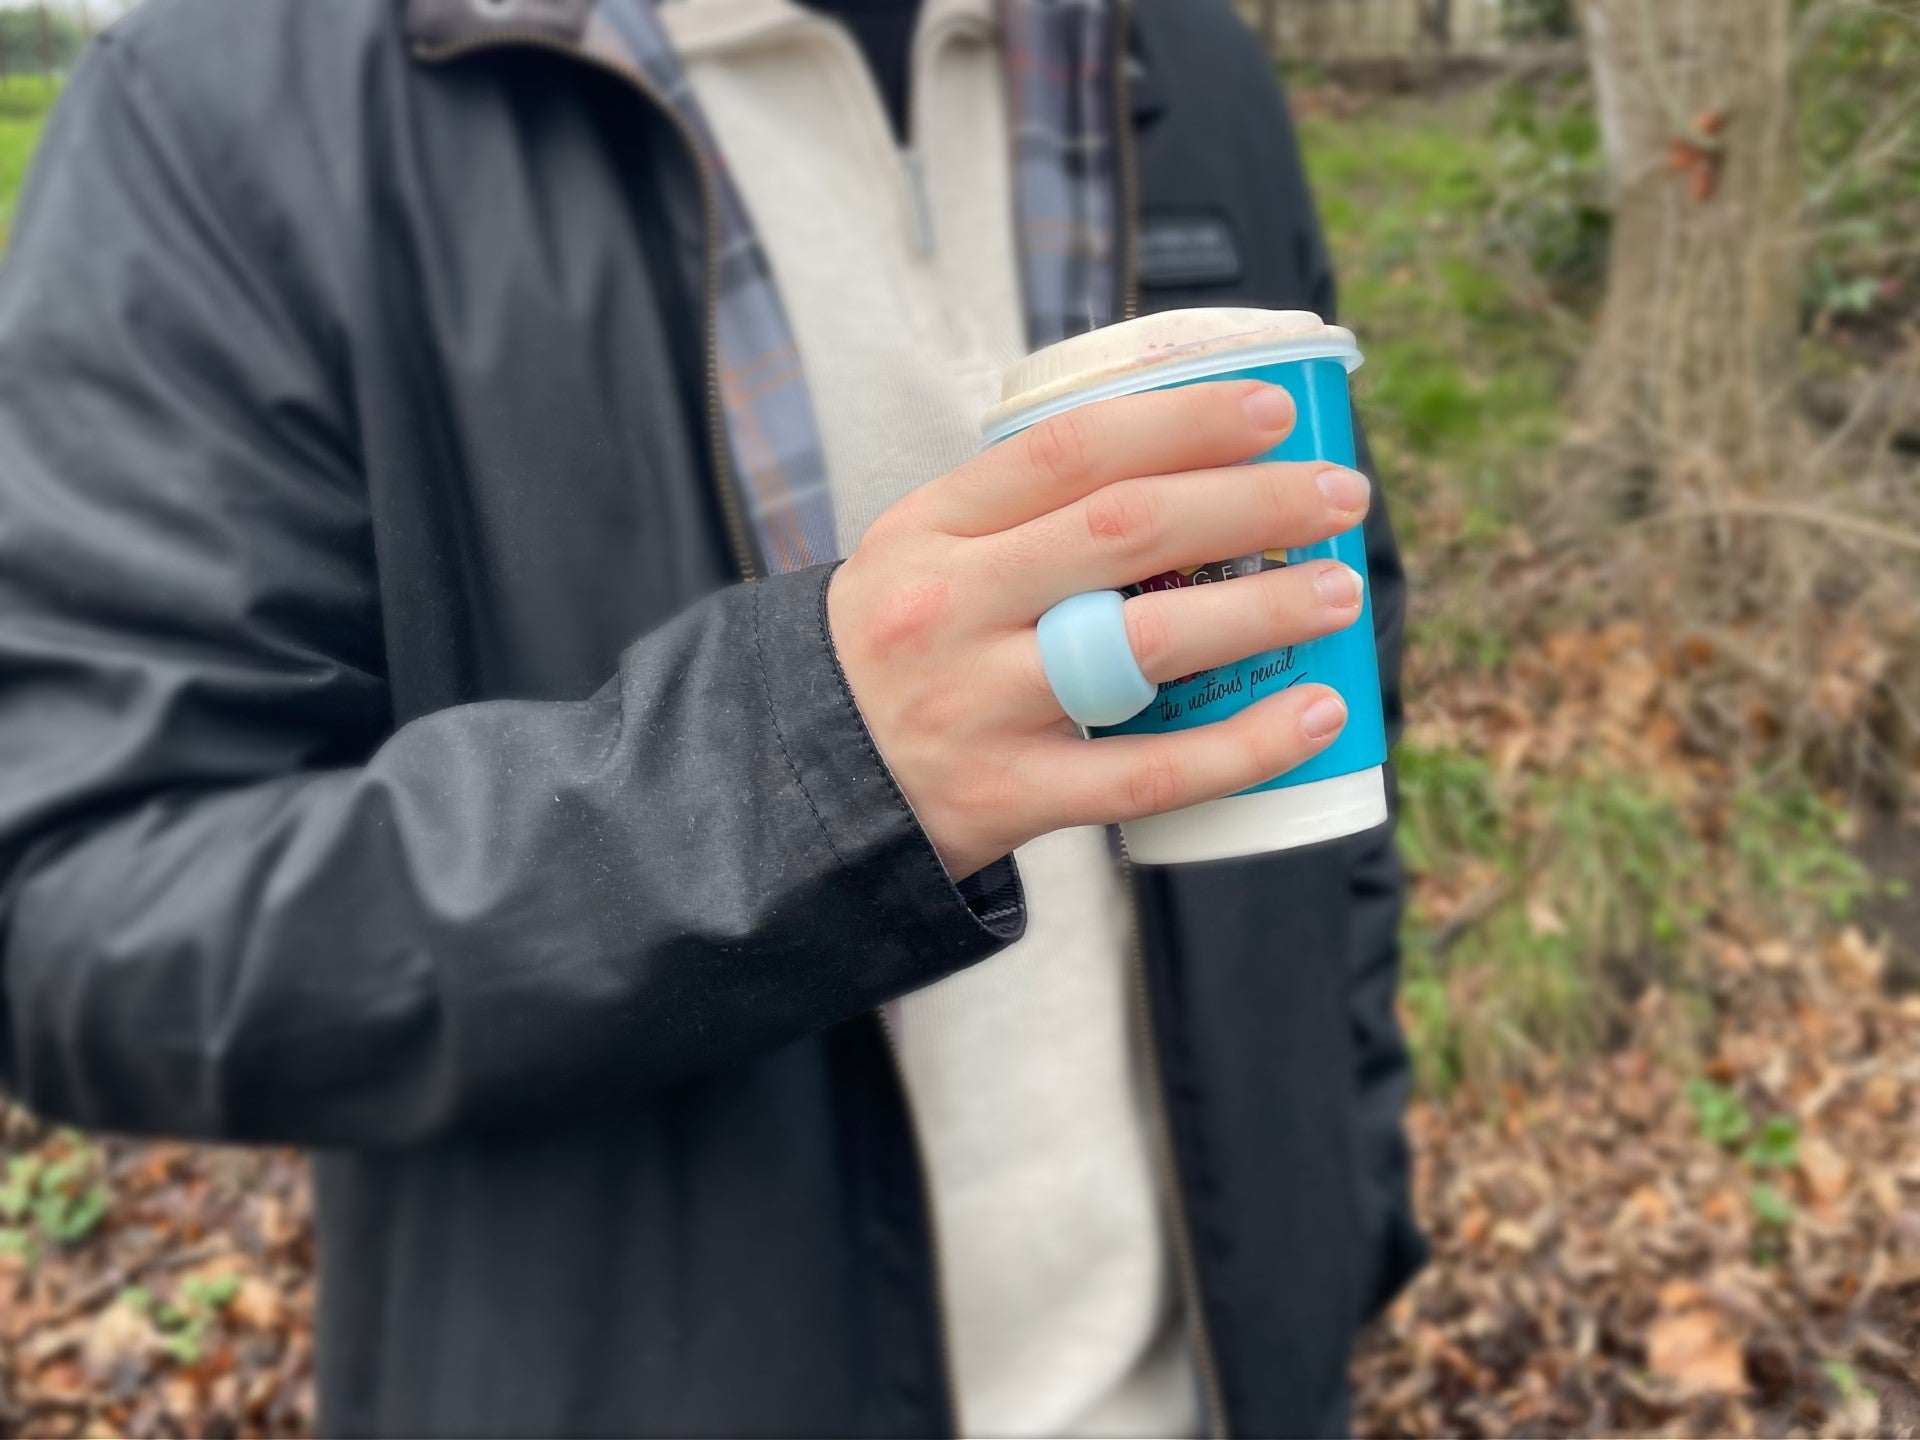 A man wears a blue ringguard ring protector on his hand to cover jewellery. He holds a coffee cup. Woodland background.